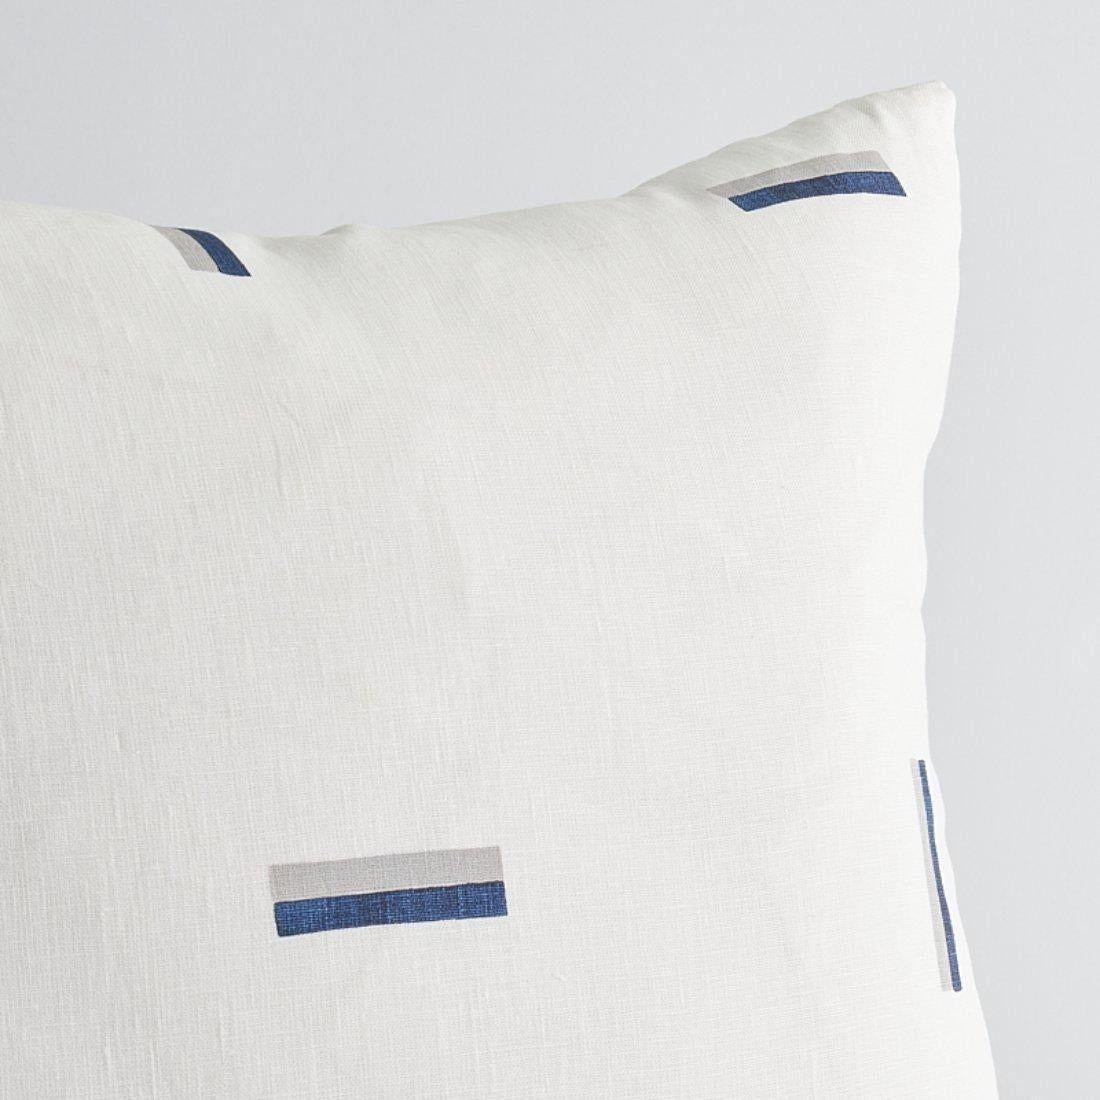 This pillow features Icehouse by Caroline Z Hurley for Schumacher with a knife edge finish. Inspired by a picturesque pond on Martha's Vineyard, this hand-blocked Caroline Z Hurley design is a true work of art, created by artisans in New Bedford,